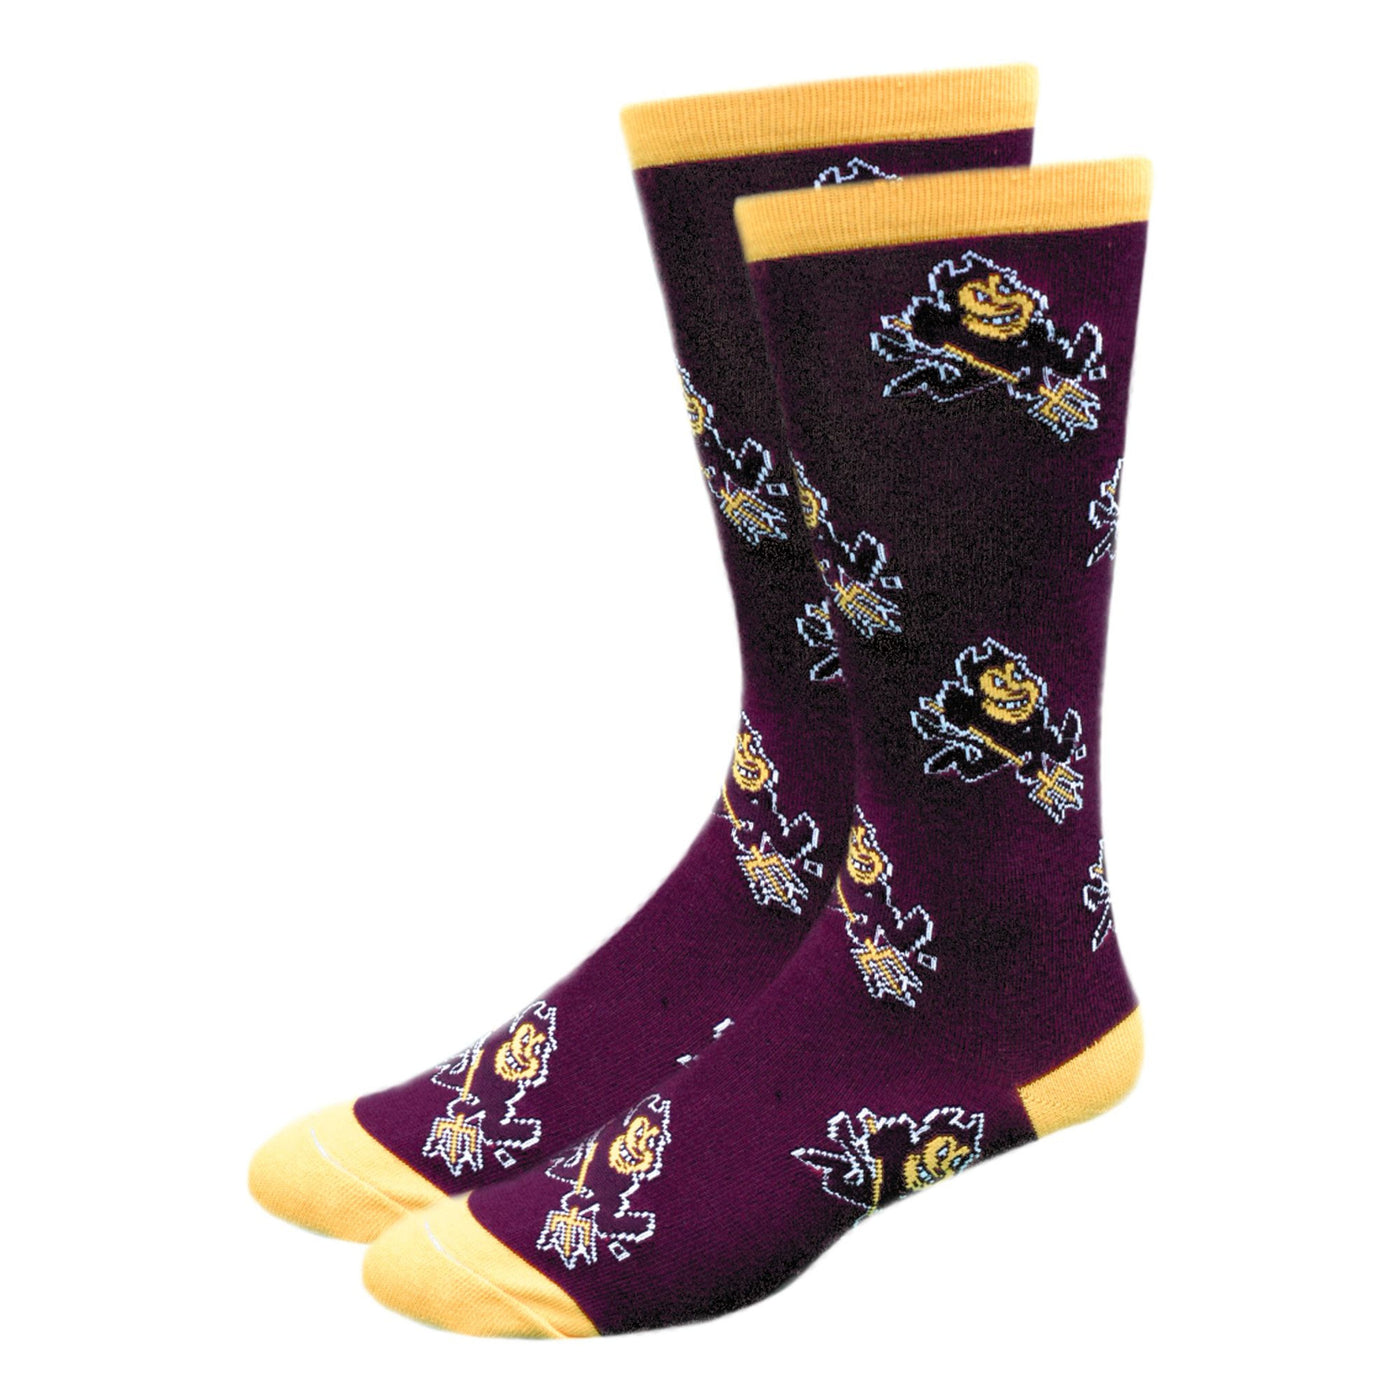 ASU Dress Sock. Maroon with a Sparky logo pattern.  Toes, heel, and top band is gold in color. 